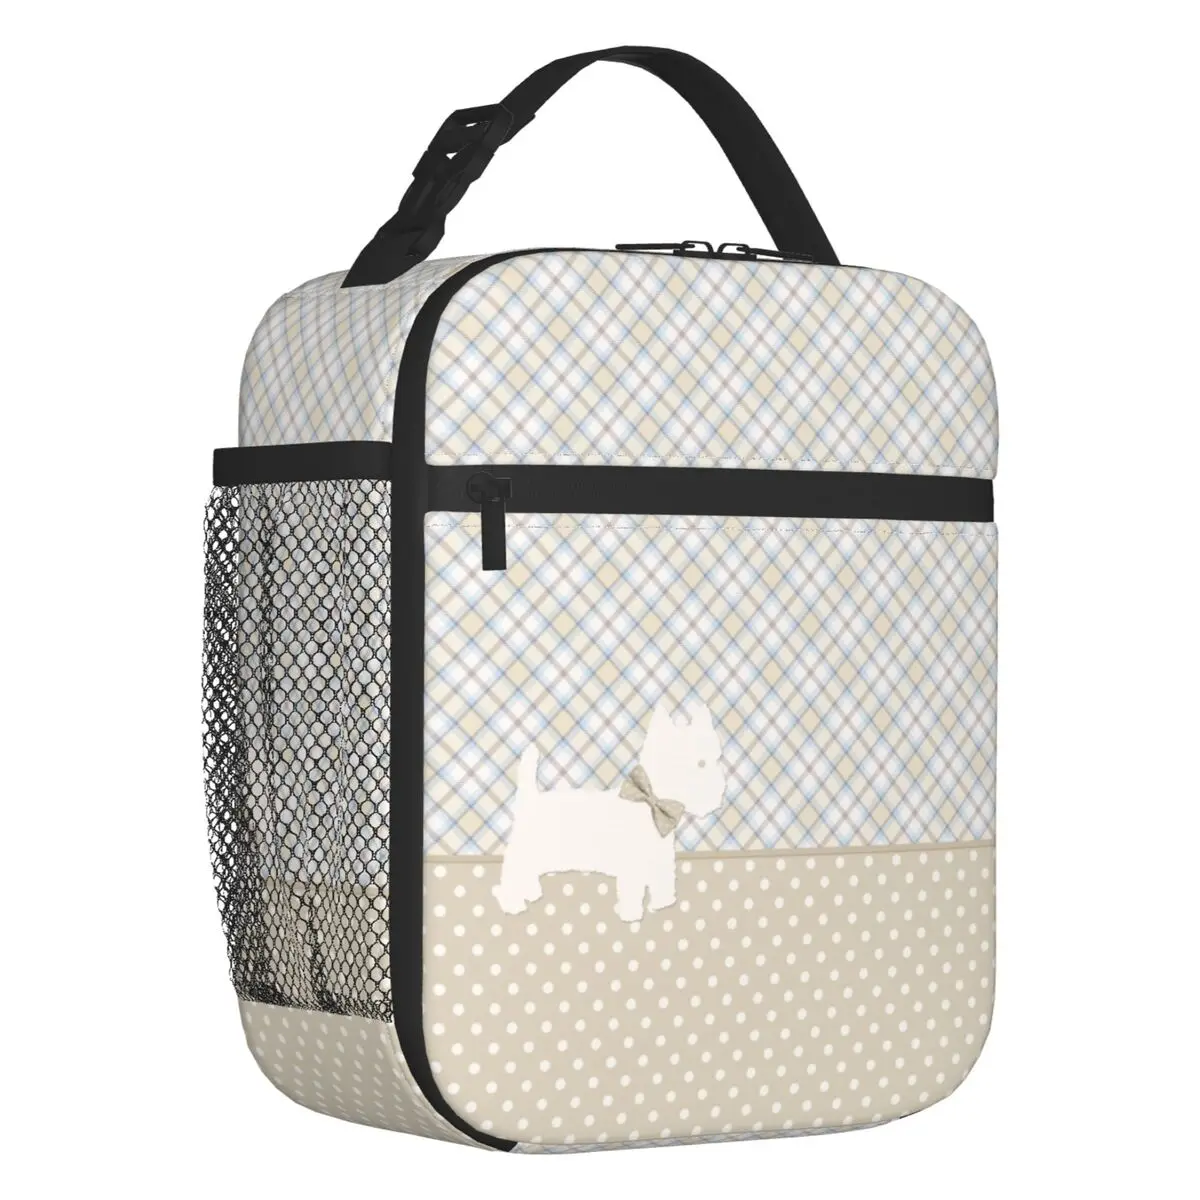 

Cartoon Westie Tartan And Polka Dots Insulated Lunch Bags West Highland White Terrier Dog Leakproof Thermal Cooler Lunch Box